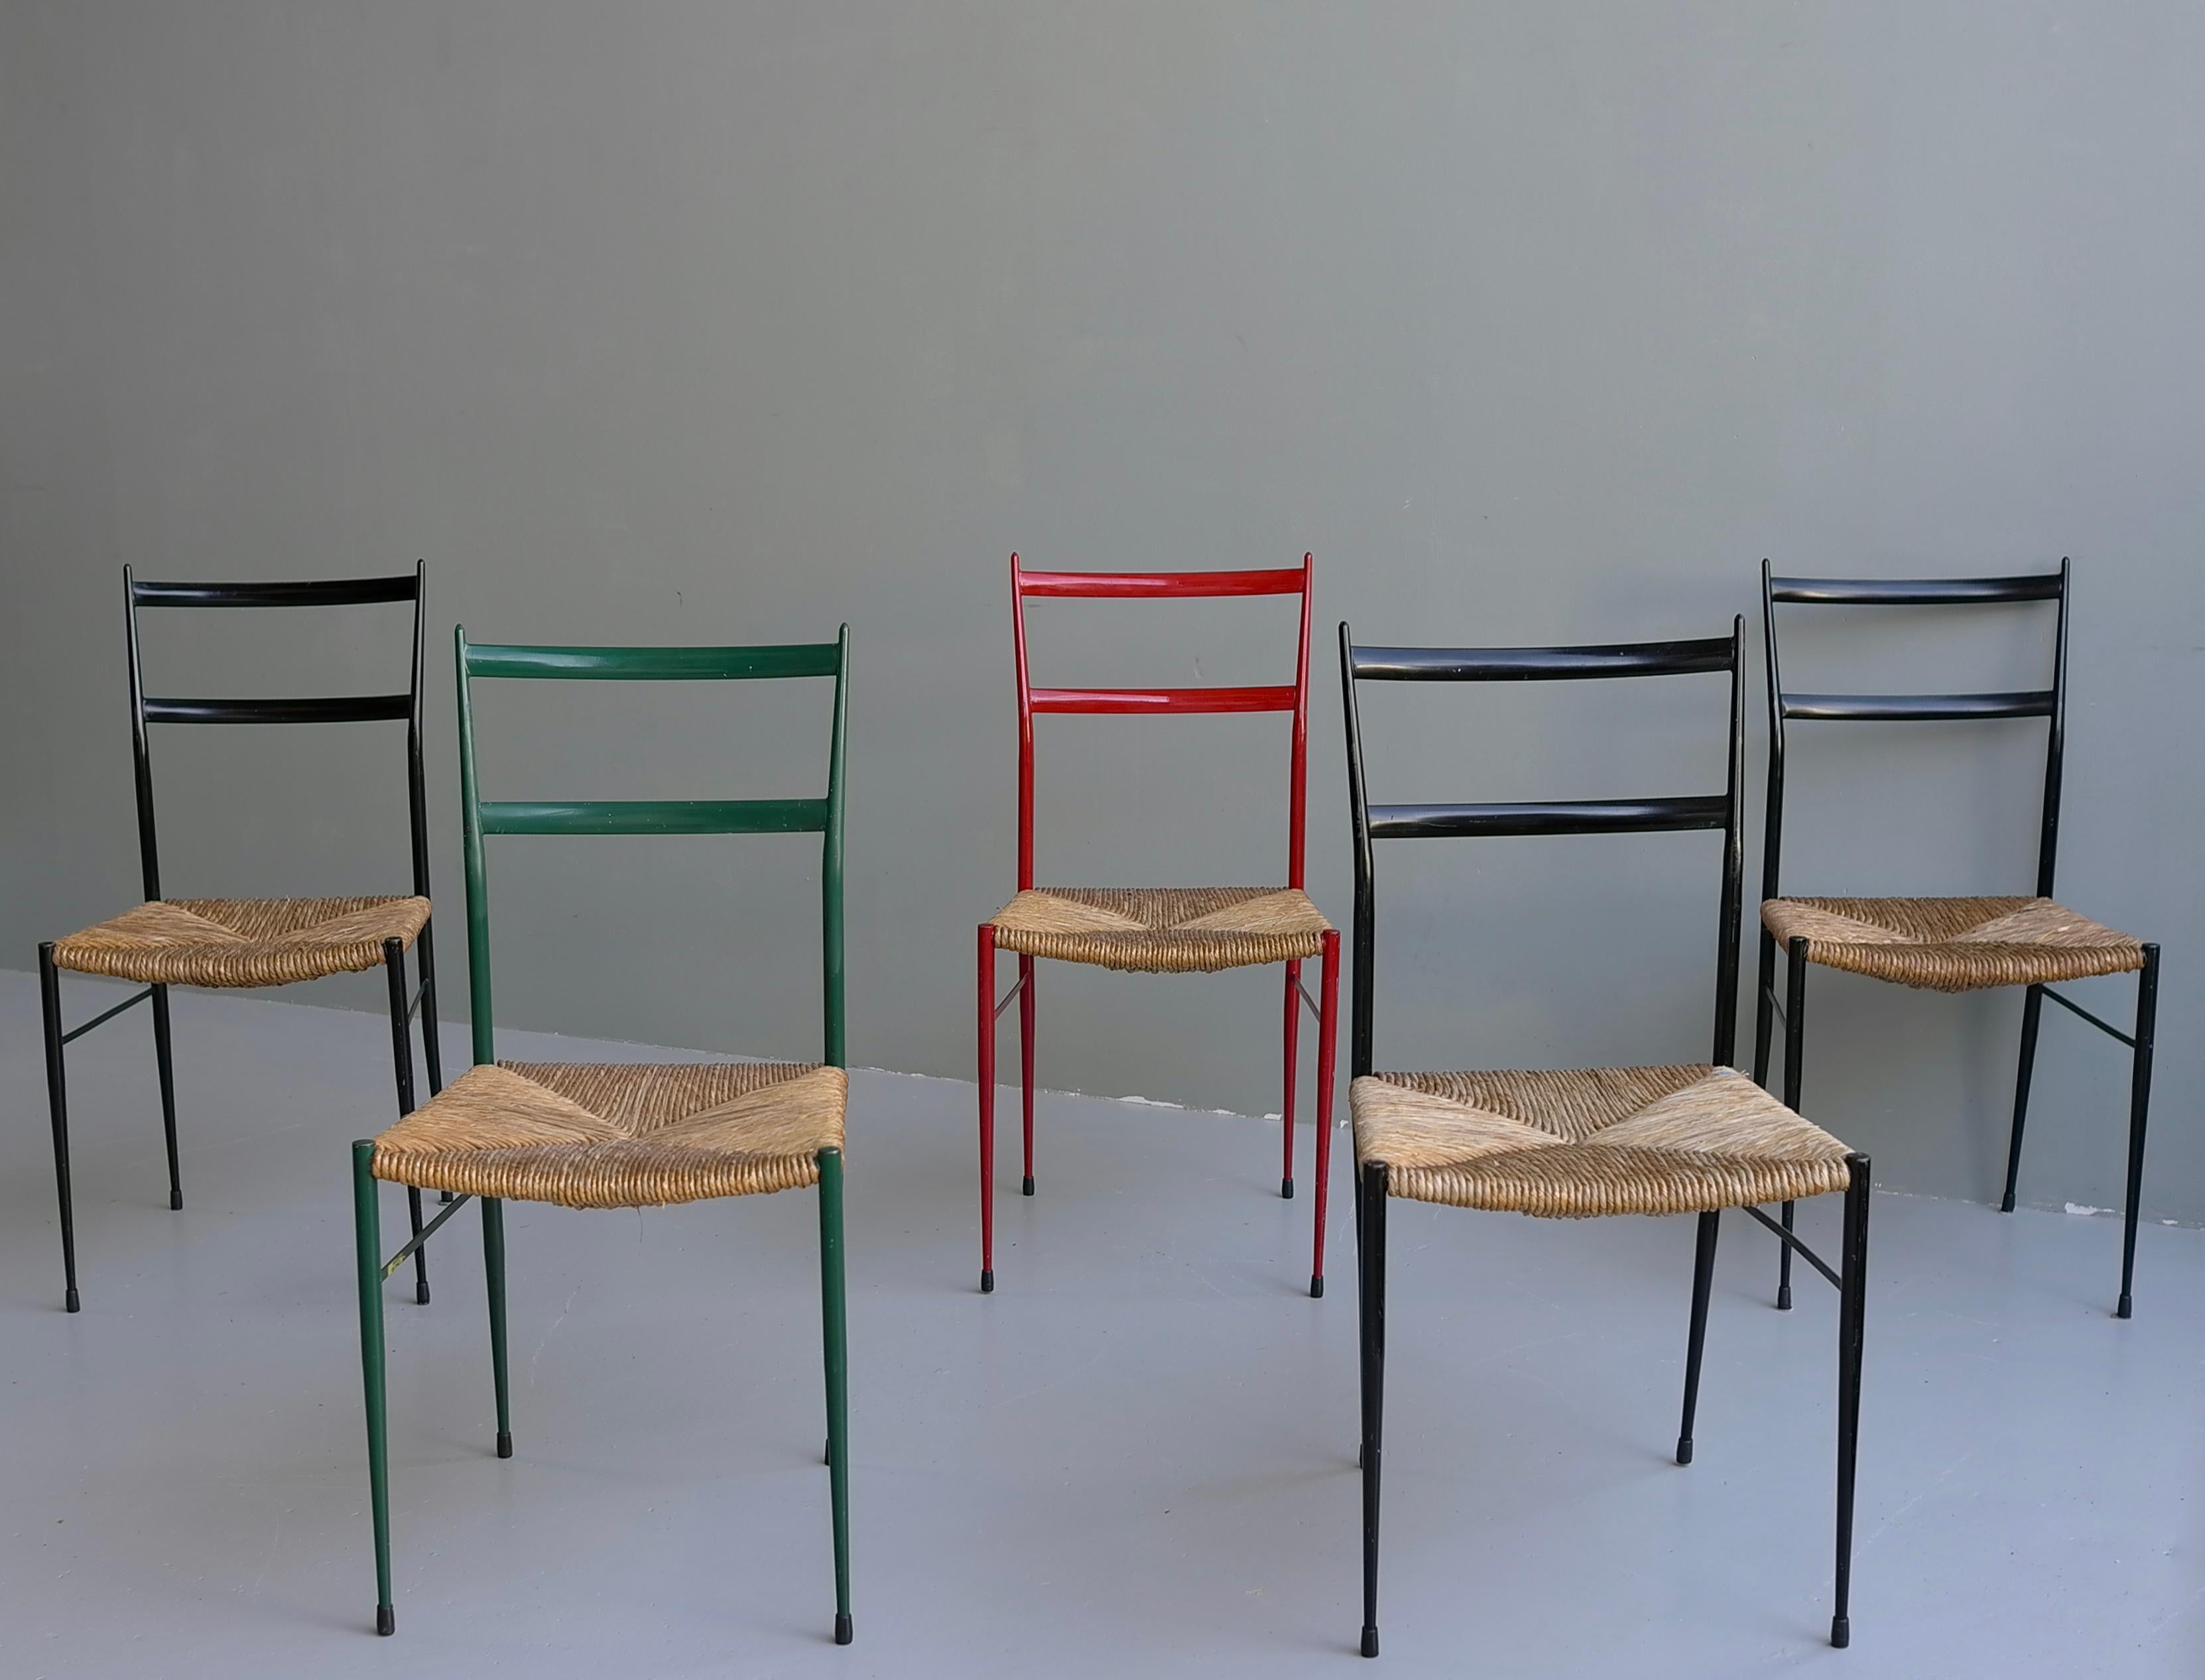 5 metal superleggera chairs attributed to Gio Ponti. These chairs where sold in the famous Dutch warehouse ''De Bijenkorf''. That Gio Ponti designed.

We have 4 pieces in stock in there original color, 3 black, 1 green(turqoise), the red is